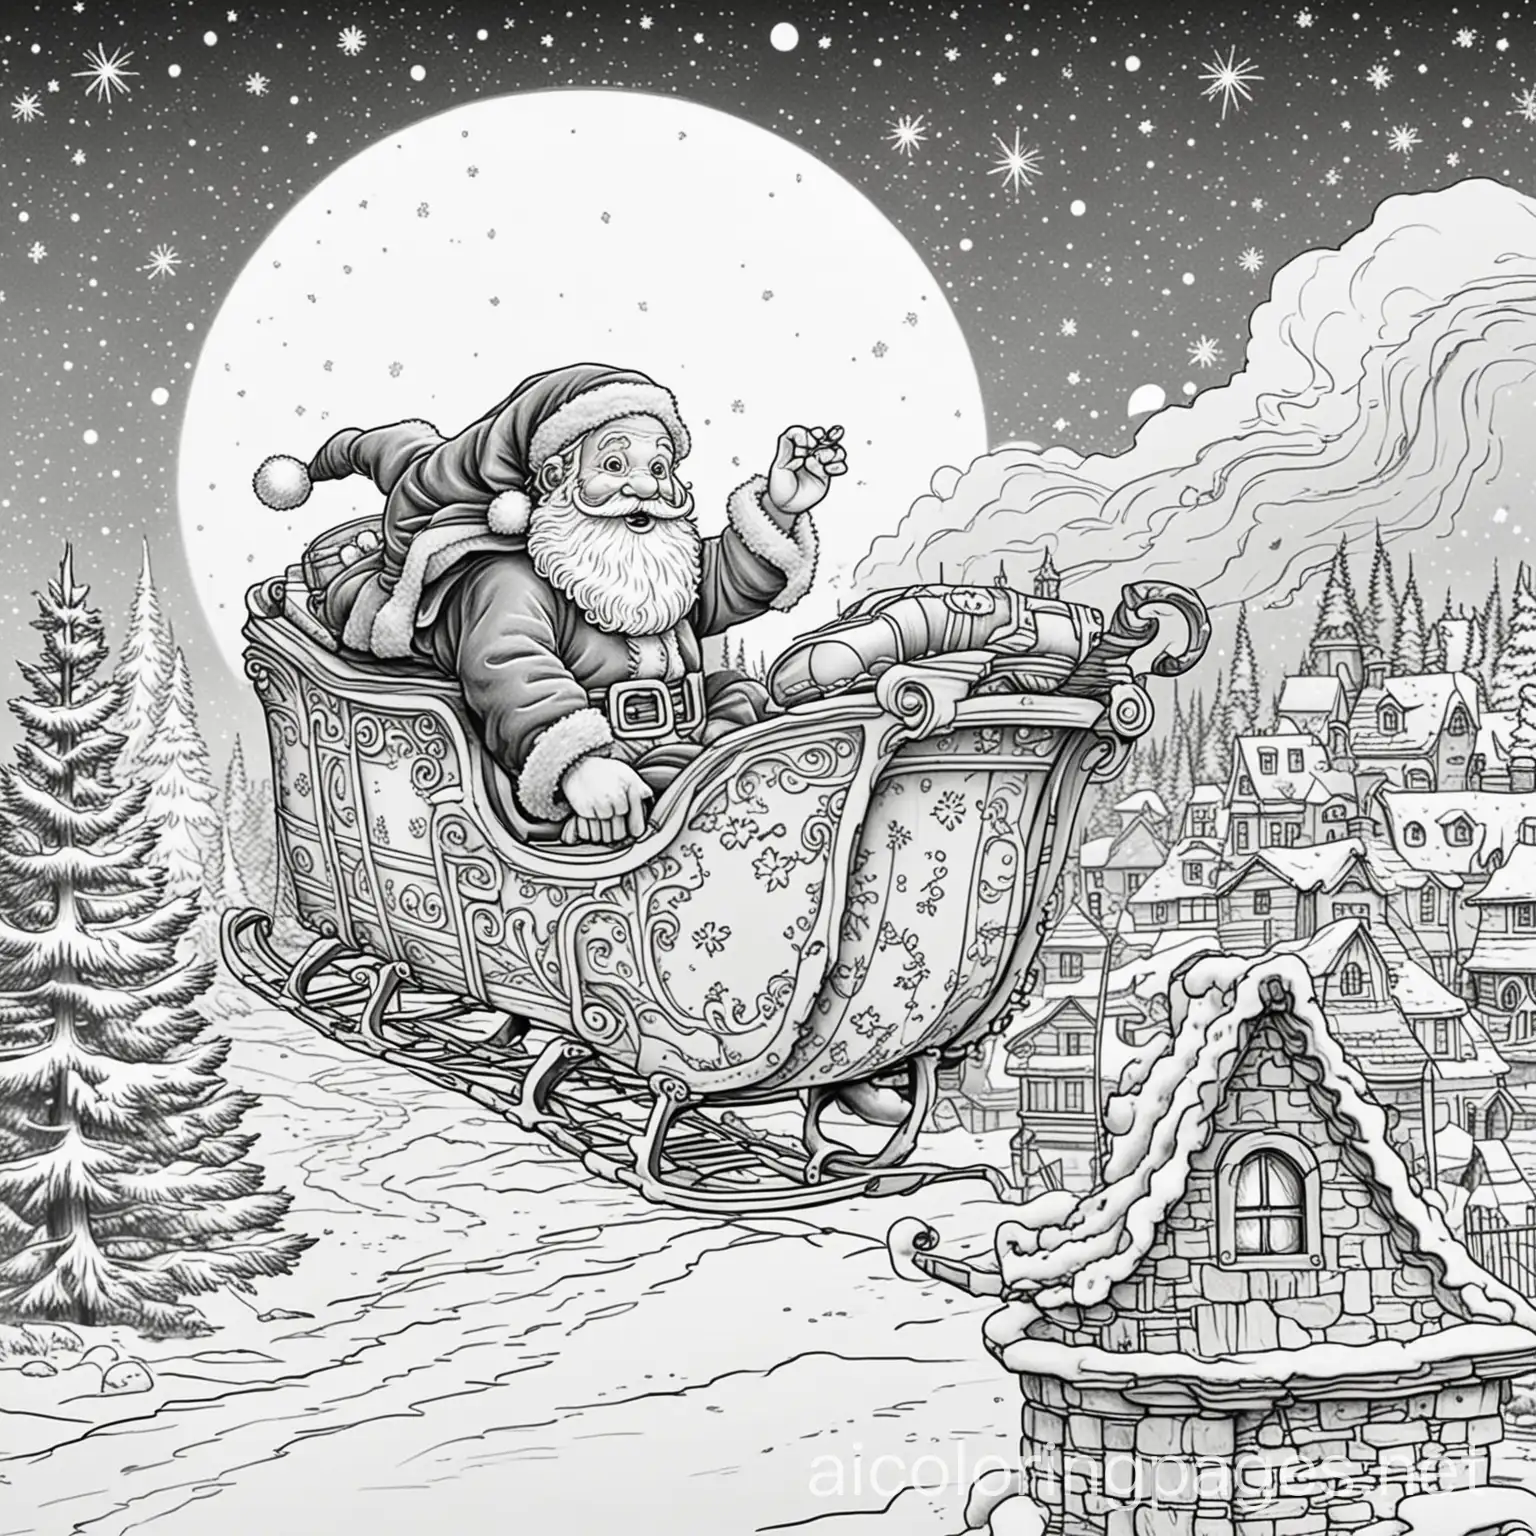 santa clause riding in a sleigh above the chimney in a snowy bright night with hollow lines for coloring  , Coloring Page, black and white, line art, white background, Simplicity, Ample White Space. The background of the coloring page is plain white to make it easy for young children to color within the lines. The outlines of all the subjects are easy to distinguish, making it simple for kids to color without too much difficulty